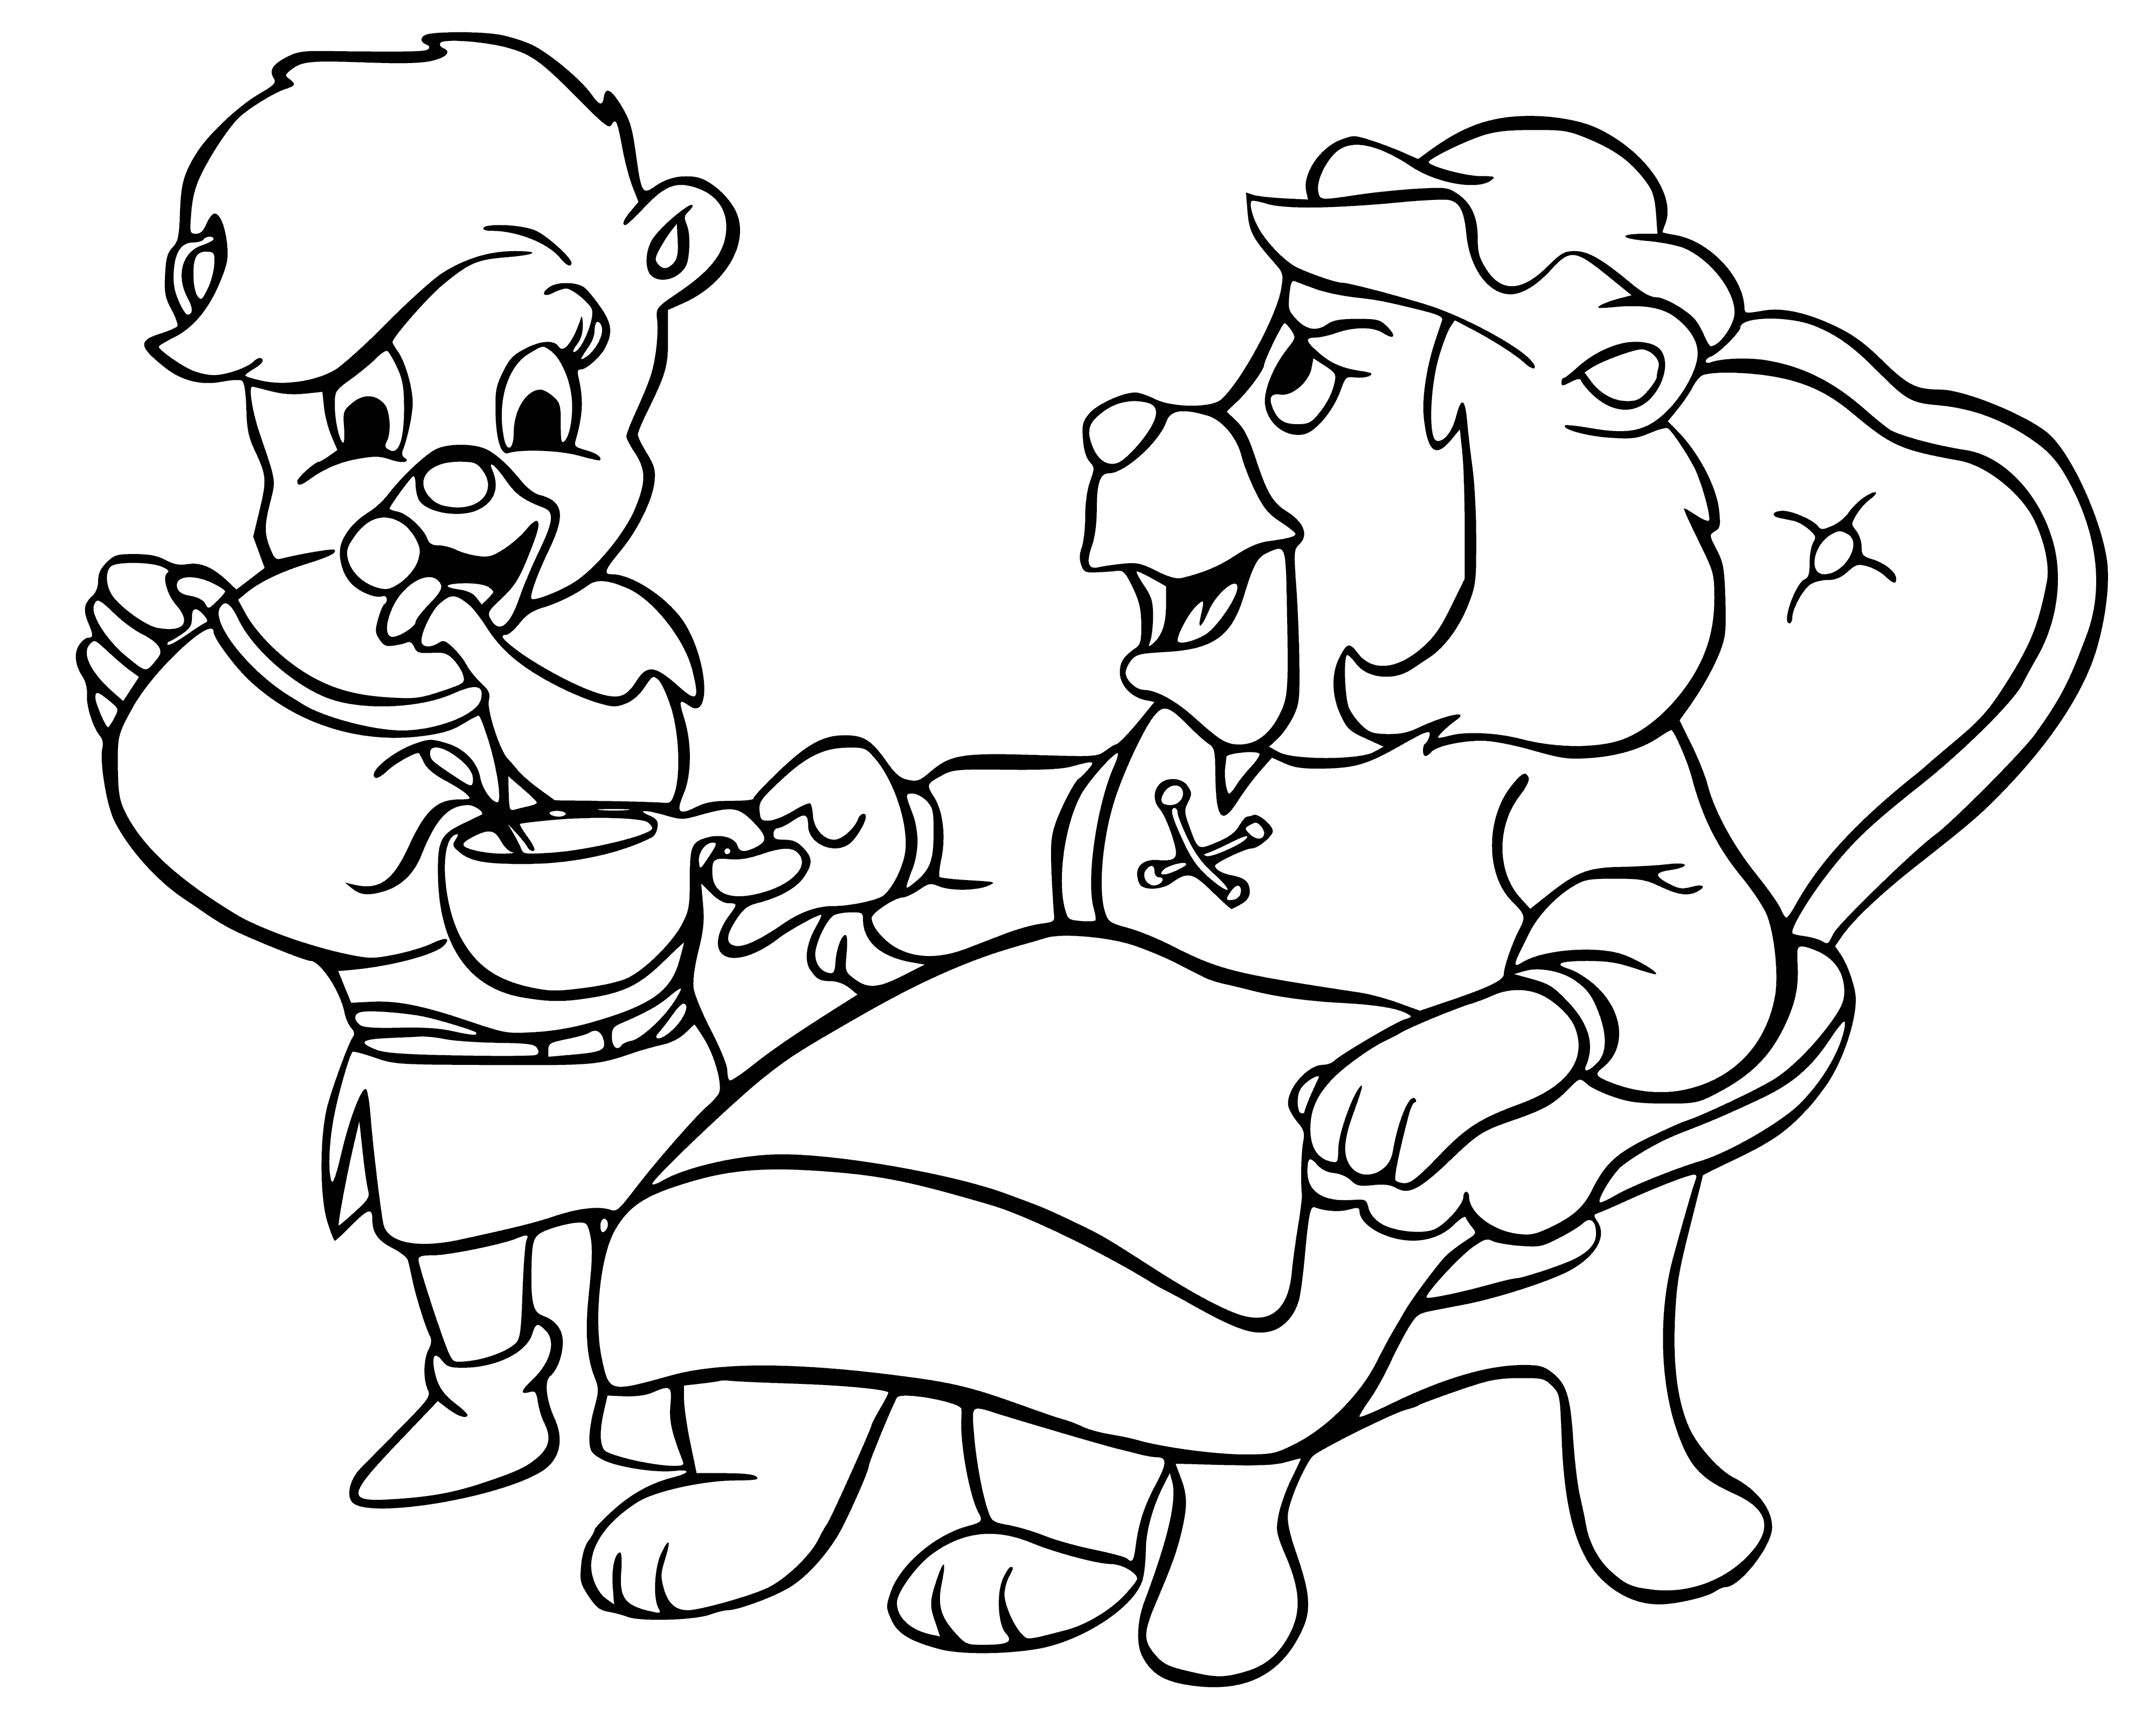 coloring page: A brown gummi bear with a light brown belly is standing on its hind legs and extending its arms, with its mouth open and tongue sticking out.